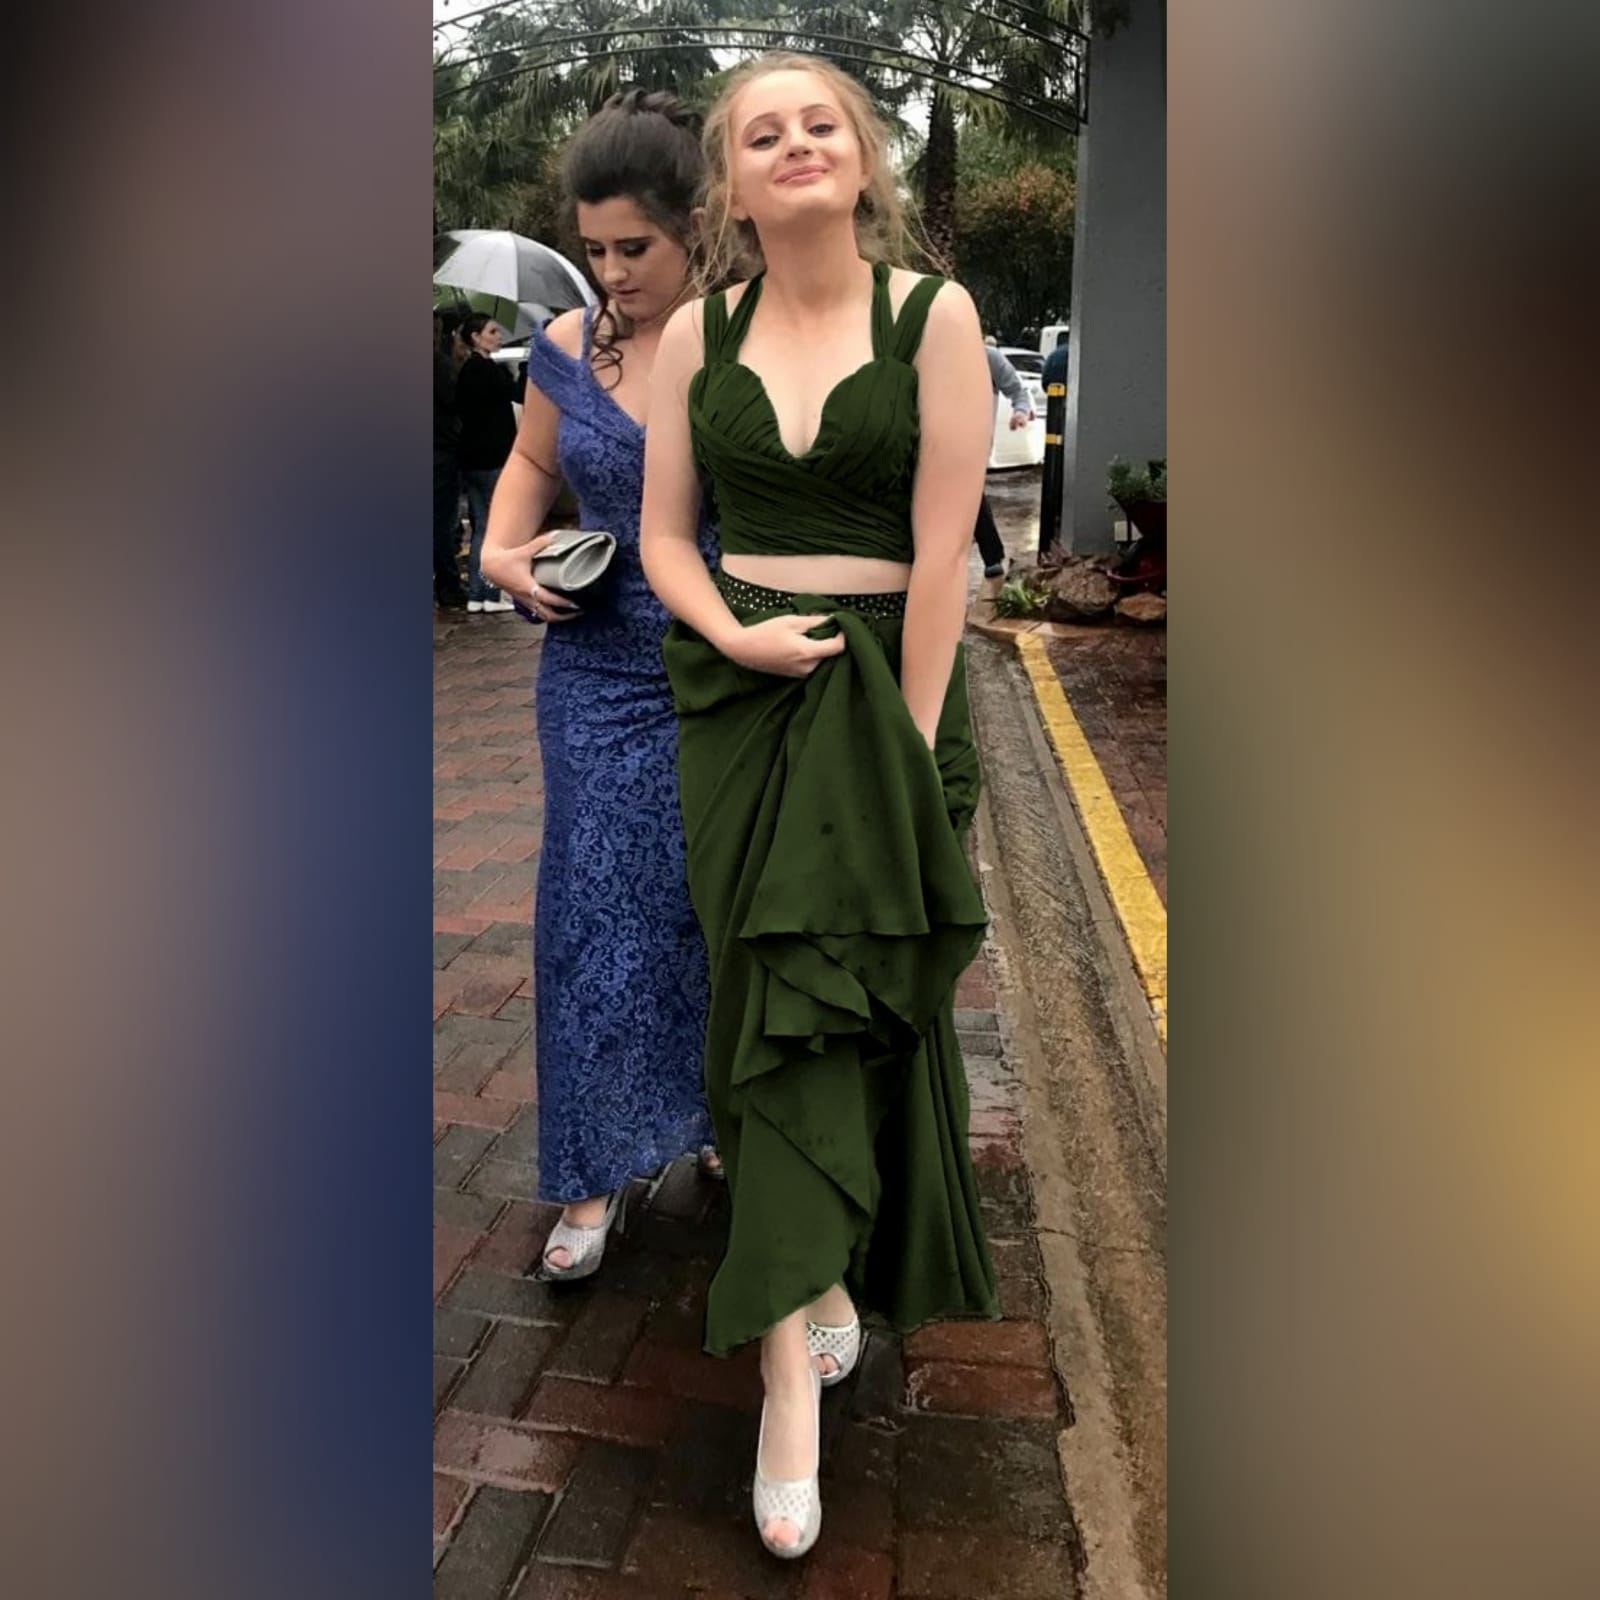 Olive green 2 piece matric dance dress 2 olive green 2 piece matric dance dress. Flowy long chiffon shirt with a little train and waistband detailed with silver beads. Pleated crop top with a rounded deep neckline , backless design with strap detail.